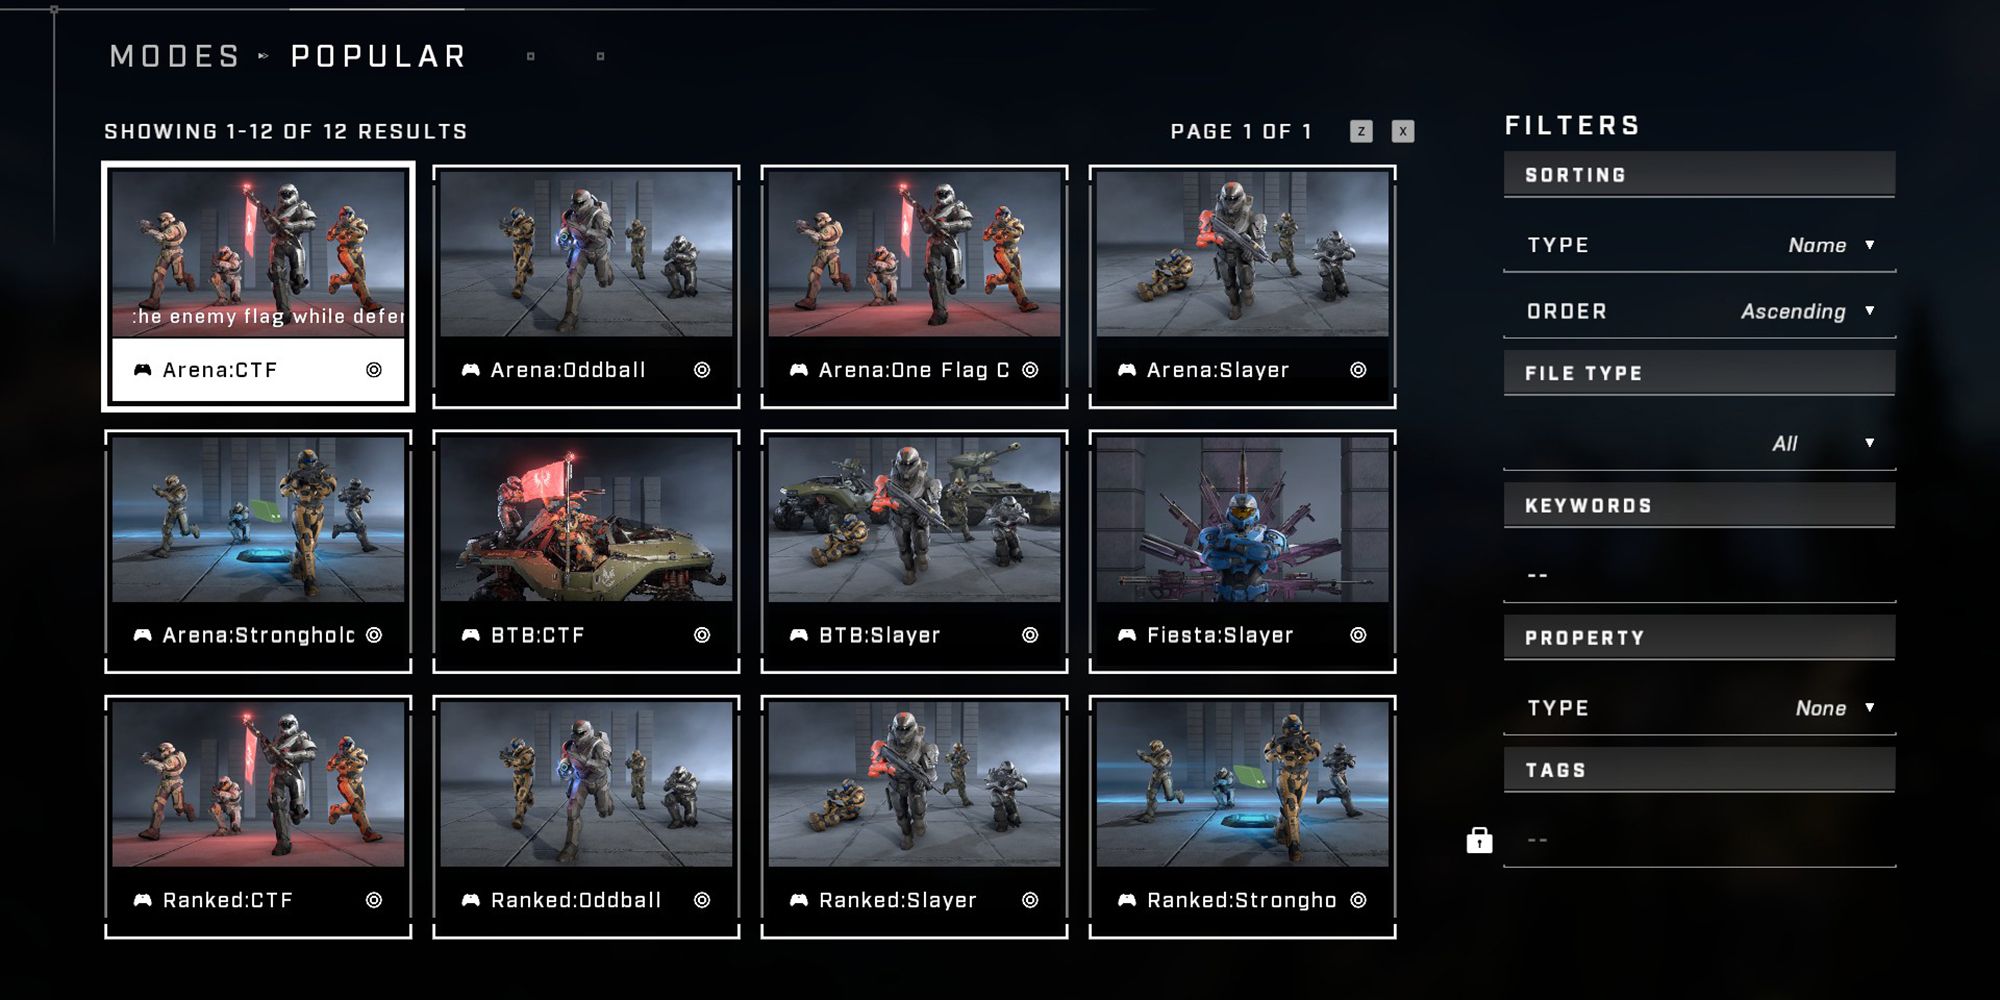 Halo Infinite - Being Able To See What Modes Are Most Popular But Not How To FIlter Matchmaking By Modes